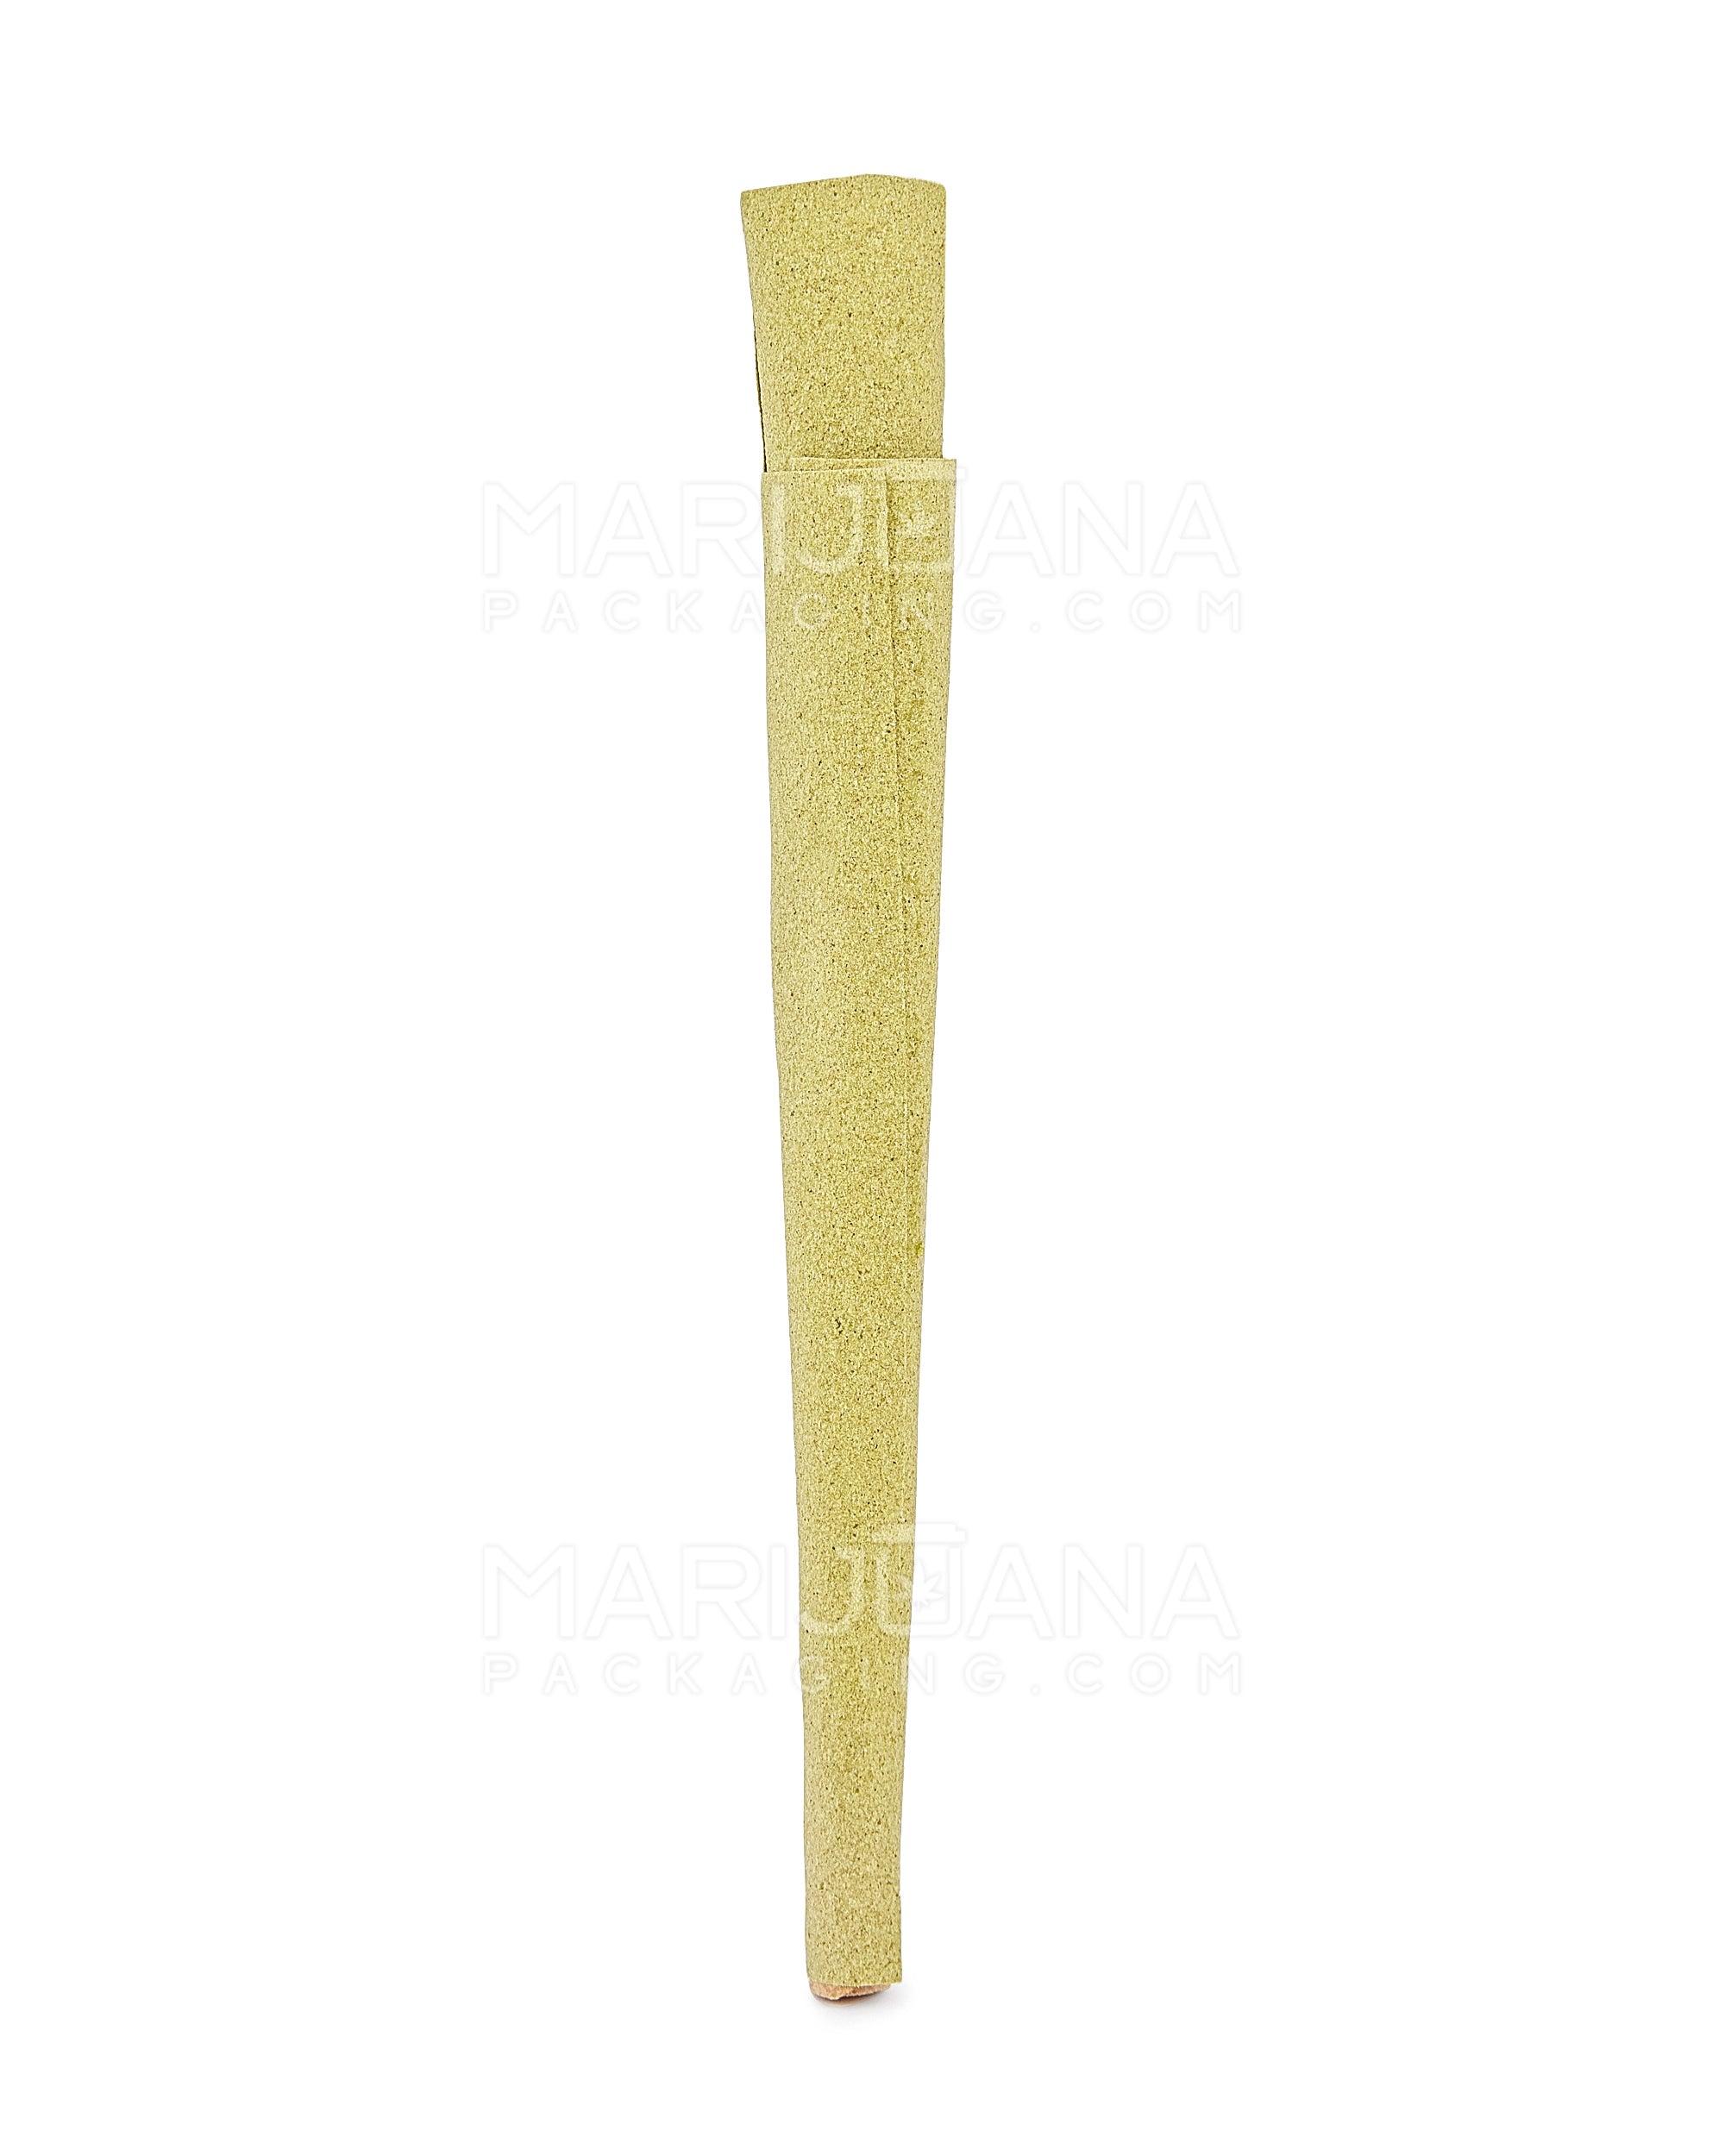 KUSH | 'Retail Display' Pre Rolled Herbal Conical Wraps | 157mm - Lemonade - 15 Count - 6